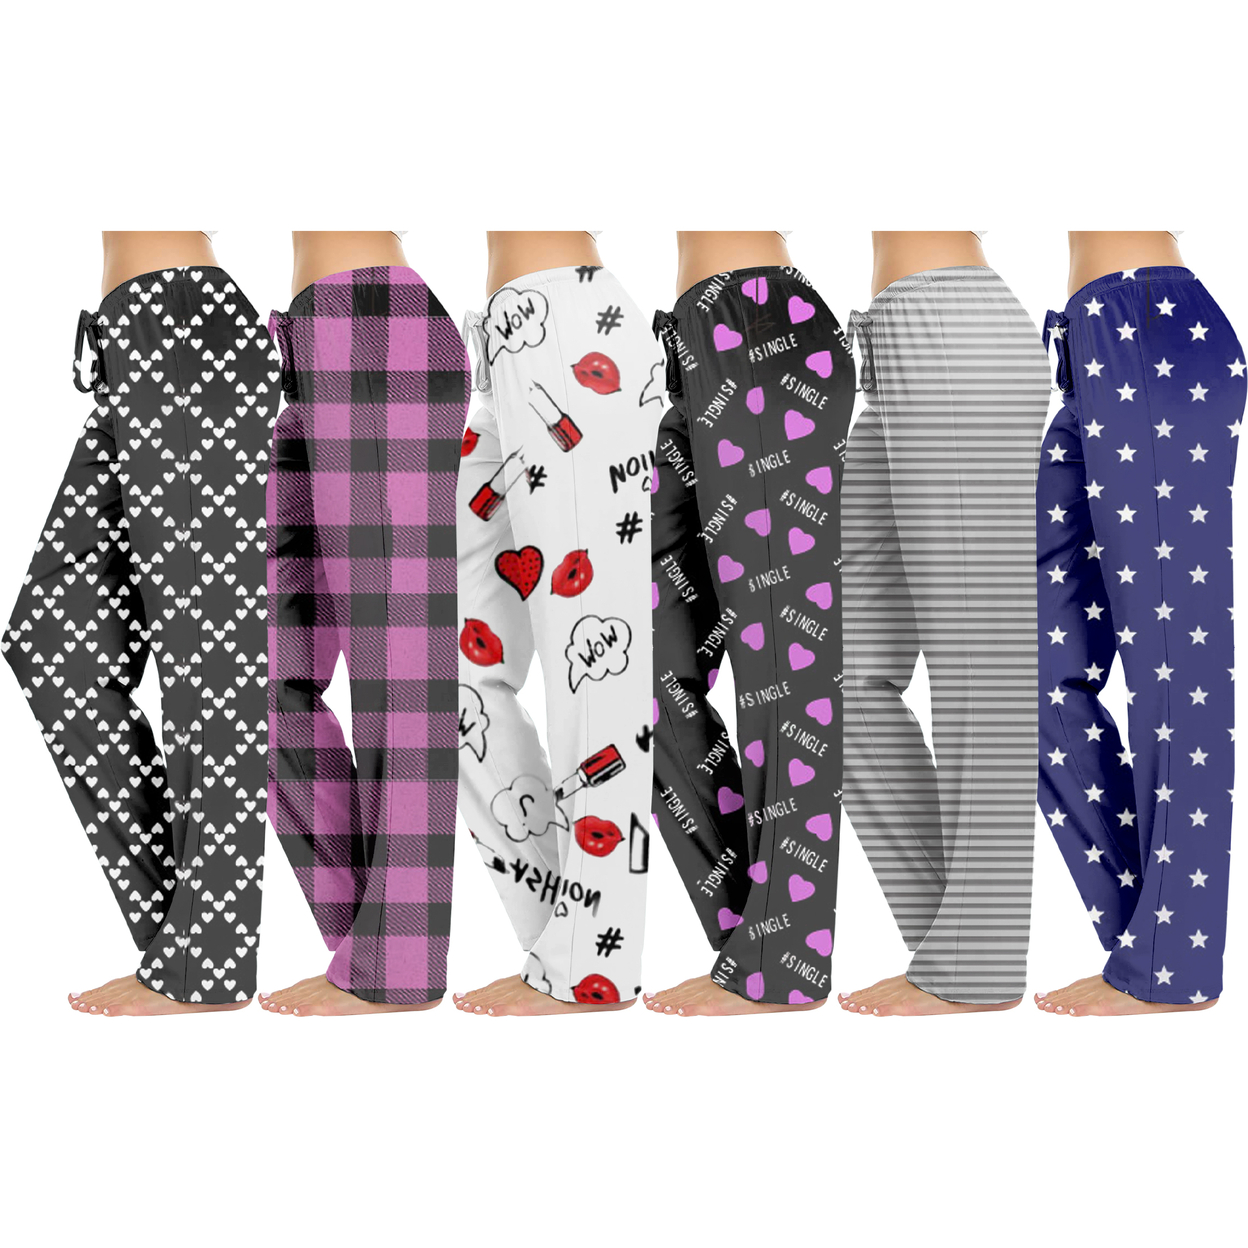 Women's Casual Fun Printed Soft Lightweight Lounge Terry Knit Pajama Bottom Pants - X-large, Shapes